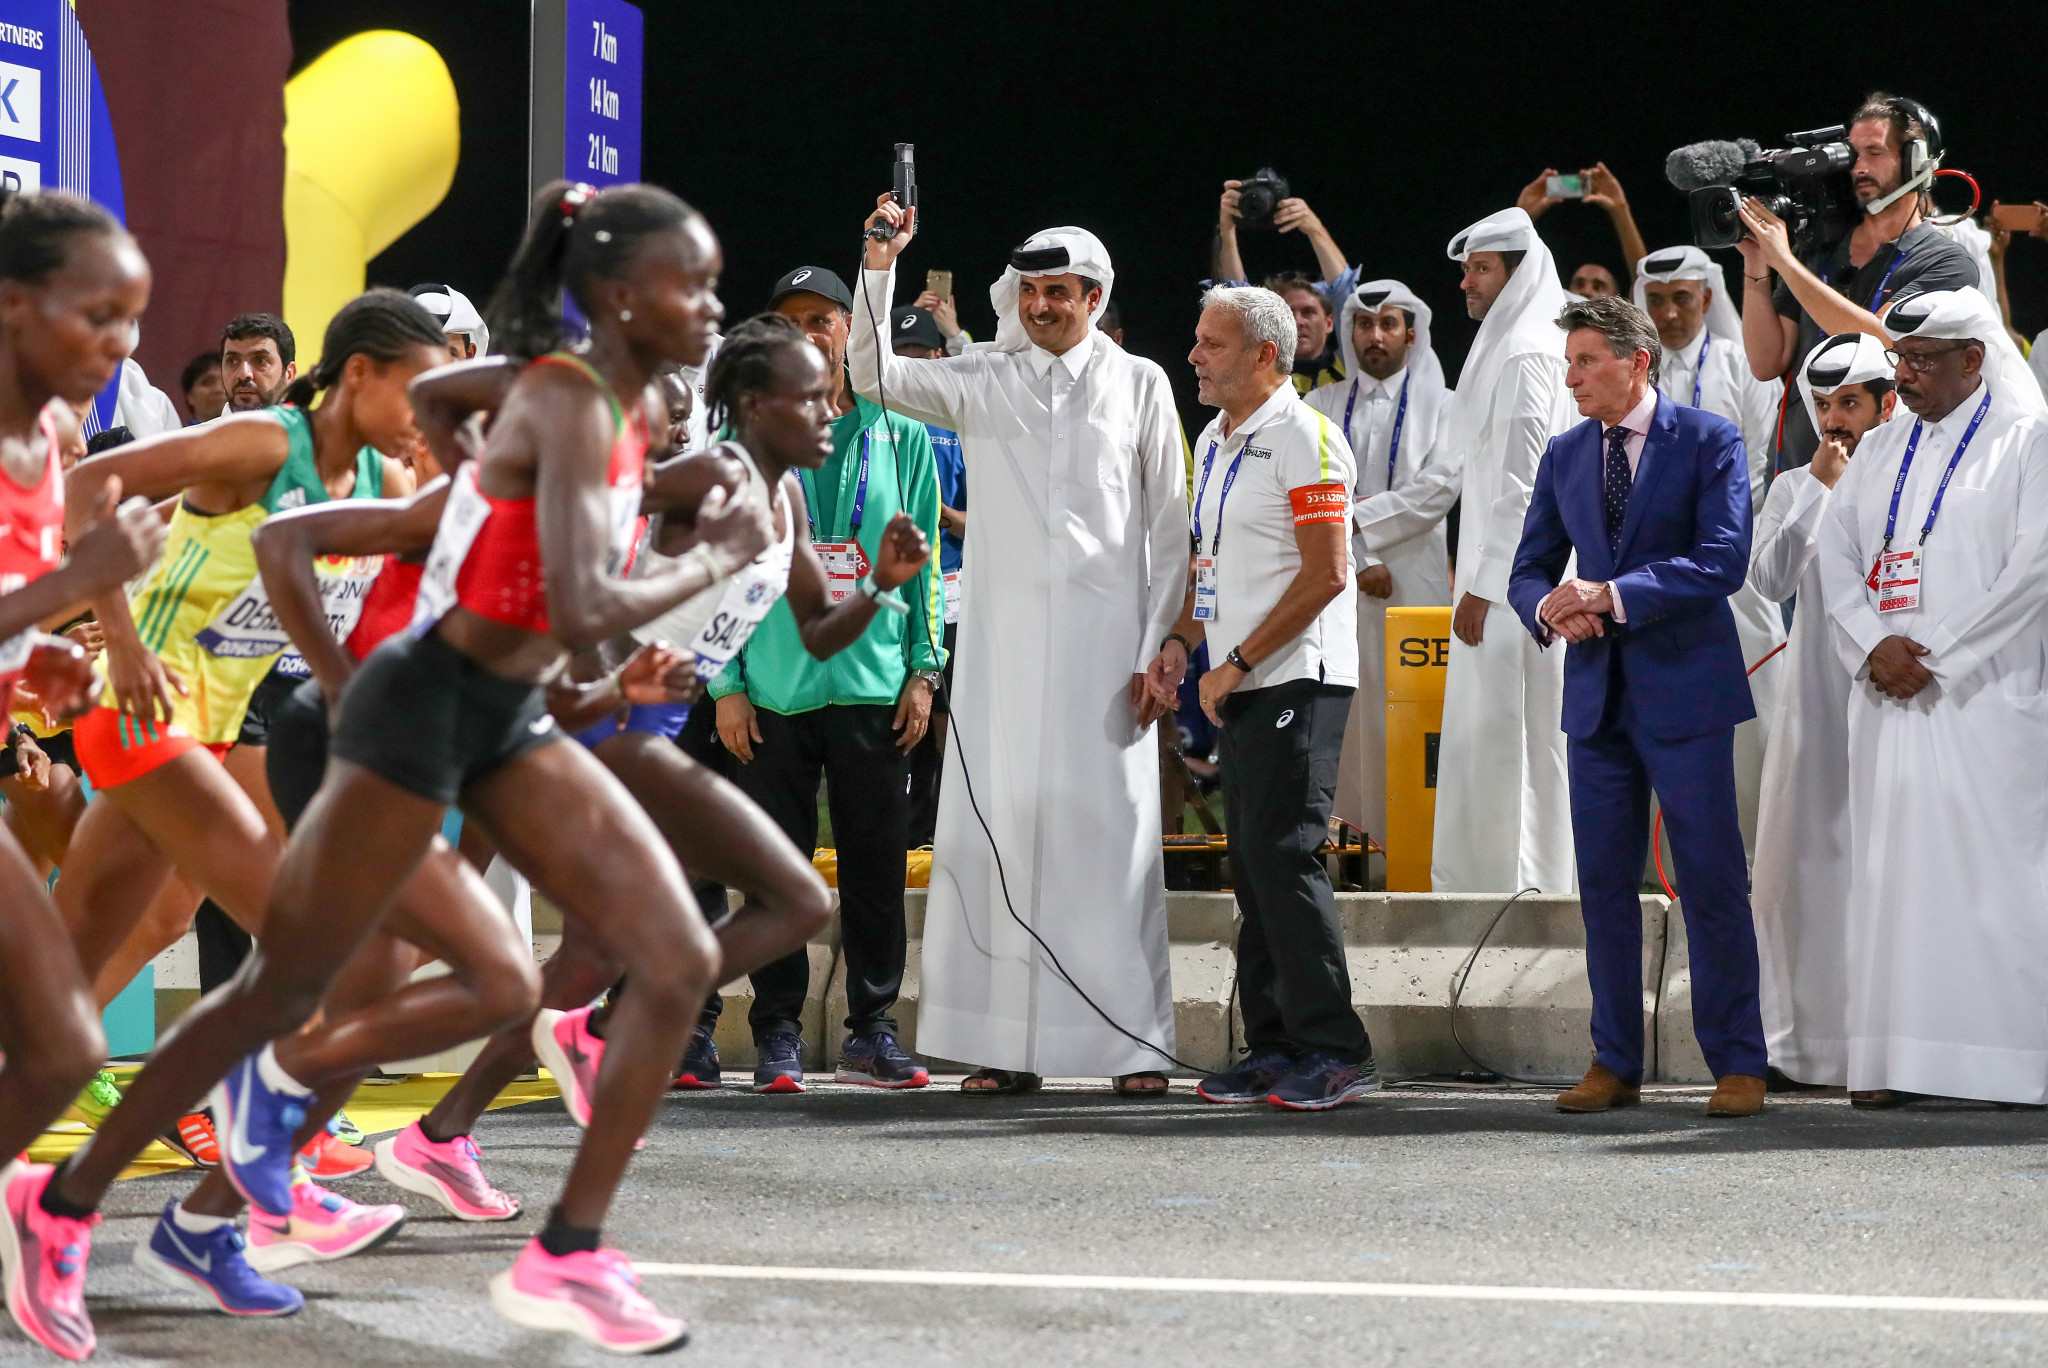 The marathon started at midnight with the runners set on their way by the Emir of Qatar in a race that the winner did not cross the finishing line until after 2.30am ©Getty Images